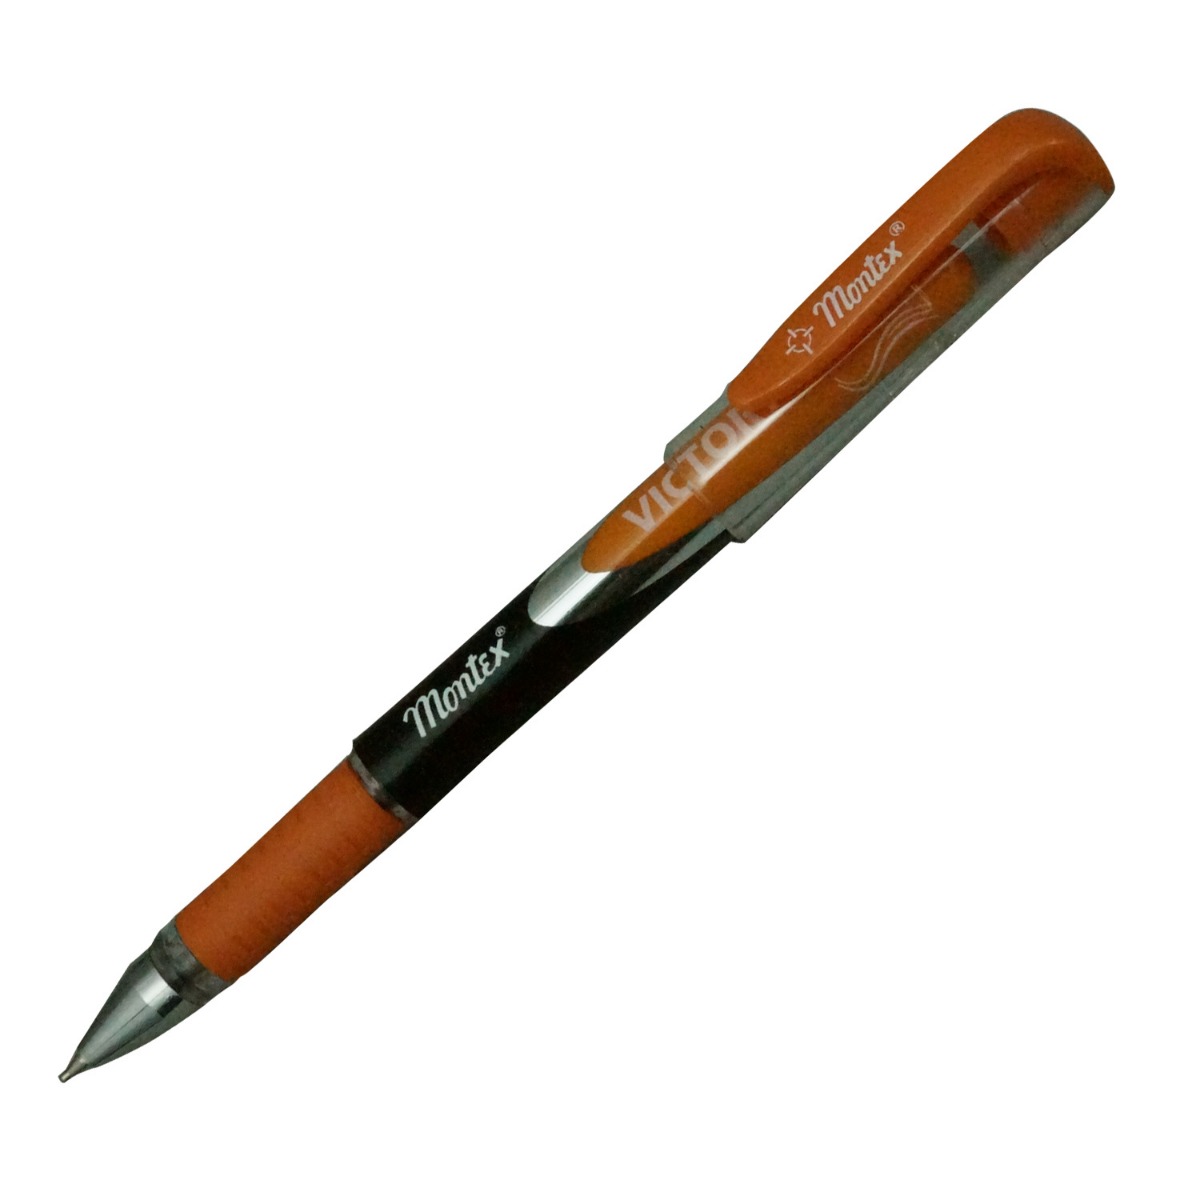 Montex Victory Model:16292 Orange Color Body With Blue Writing Cap Type Ball Pen